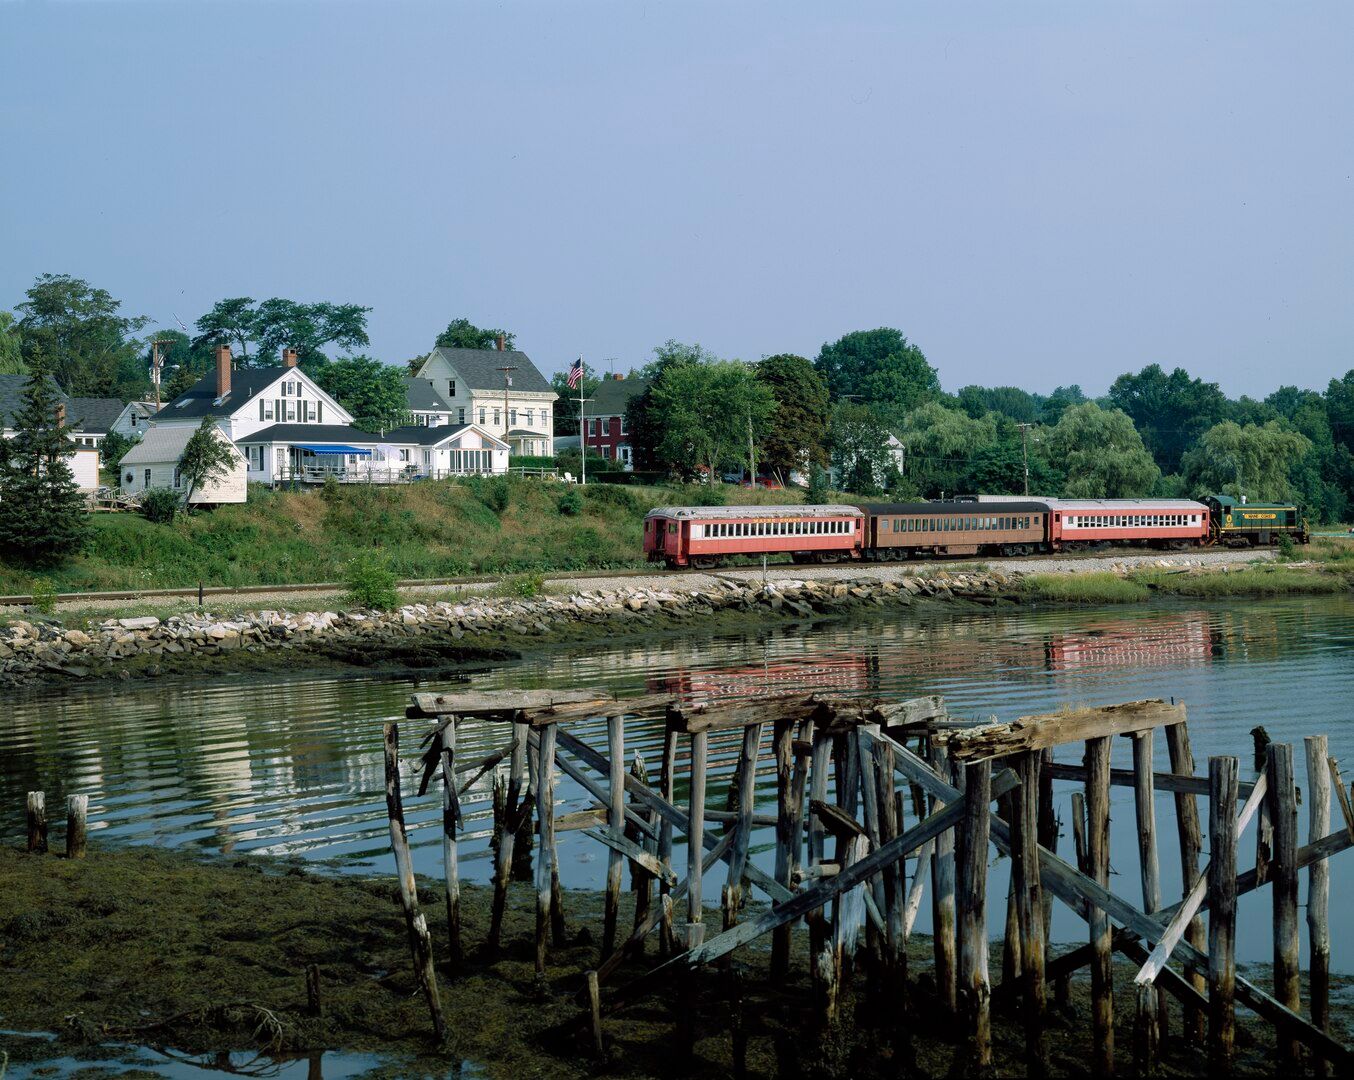 Train and homes along the water in Wiscasset, Maine, USA